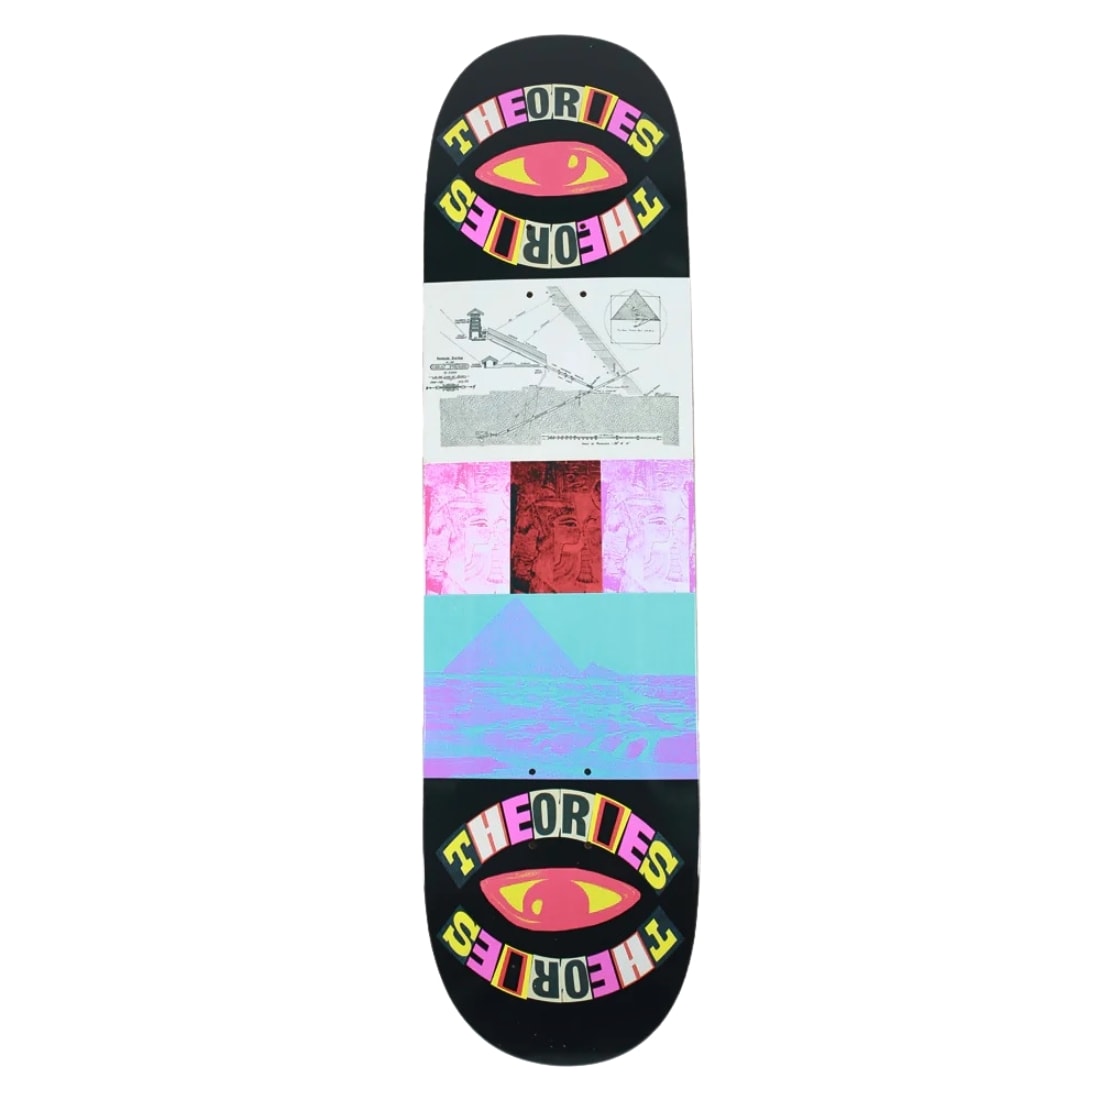 Theories 8.5" Kings Chamber Deck - Multi - Skateboard Deck by Theories 8.5 inch